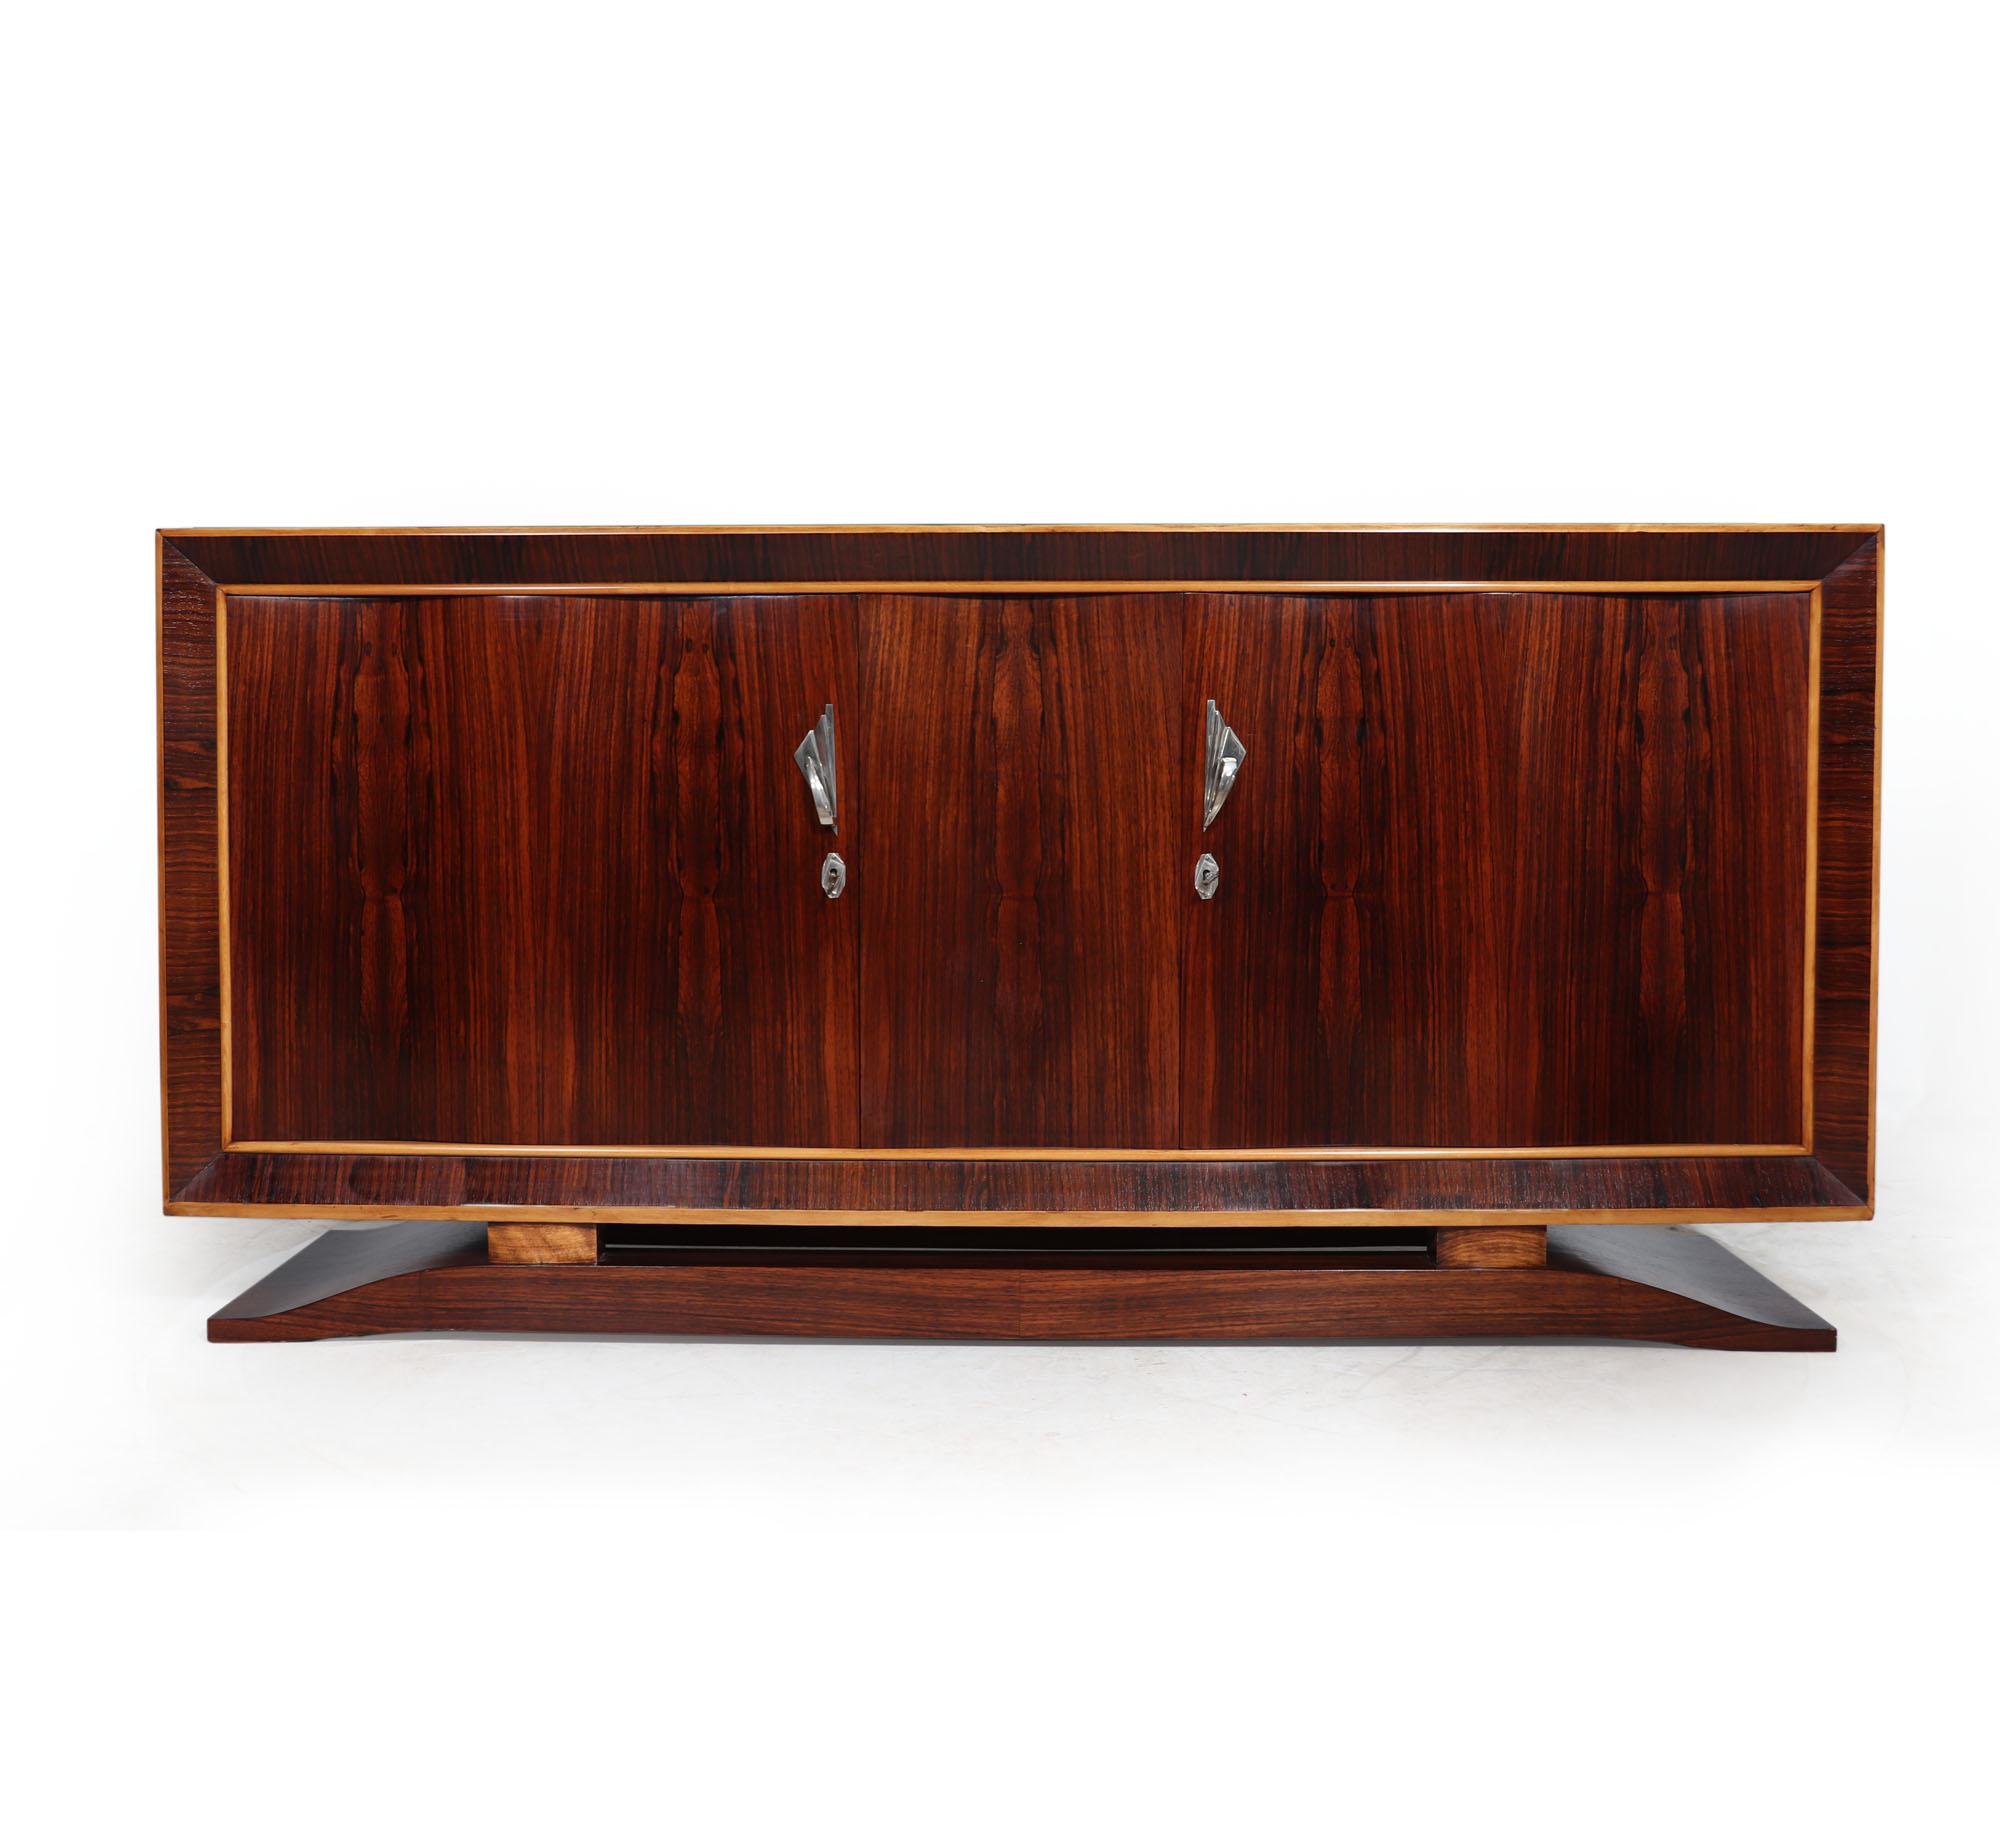 The French Art Deco Sideboard in Rosewood is a beautiful piece of furniture that makes a lasting impression. The sideboard is crafted from rosewood and features two shaped doors with silvered handles, creating a classic look. It has plenty of